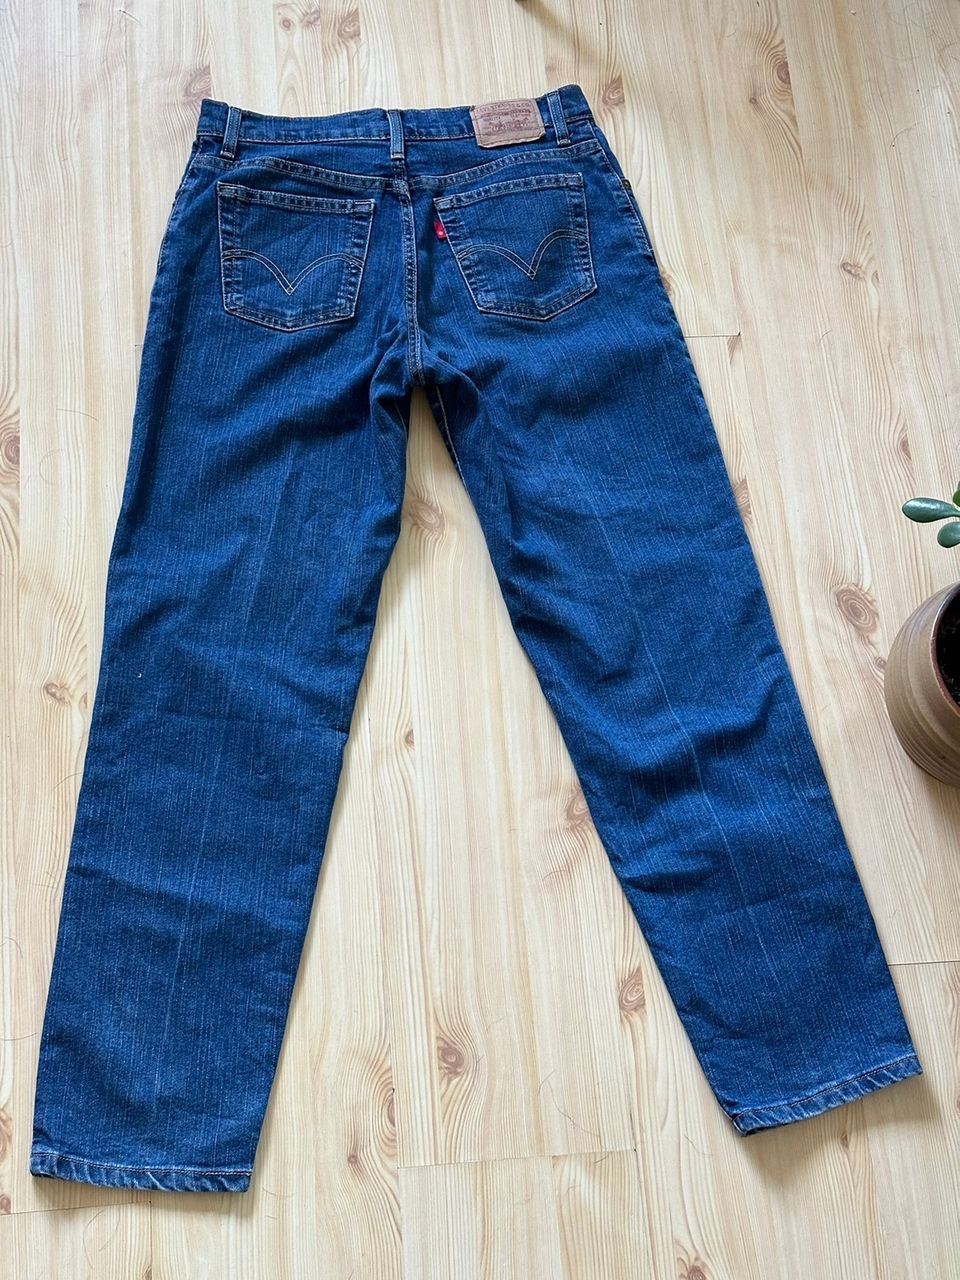 Levis 550 Classic Relaxed Tapered (12 M)